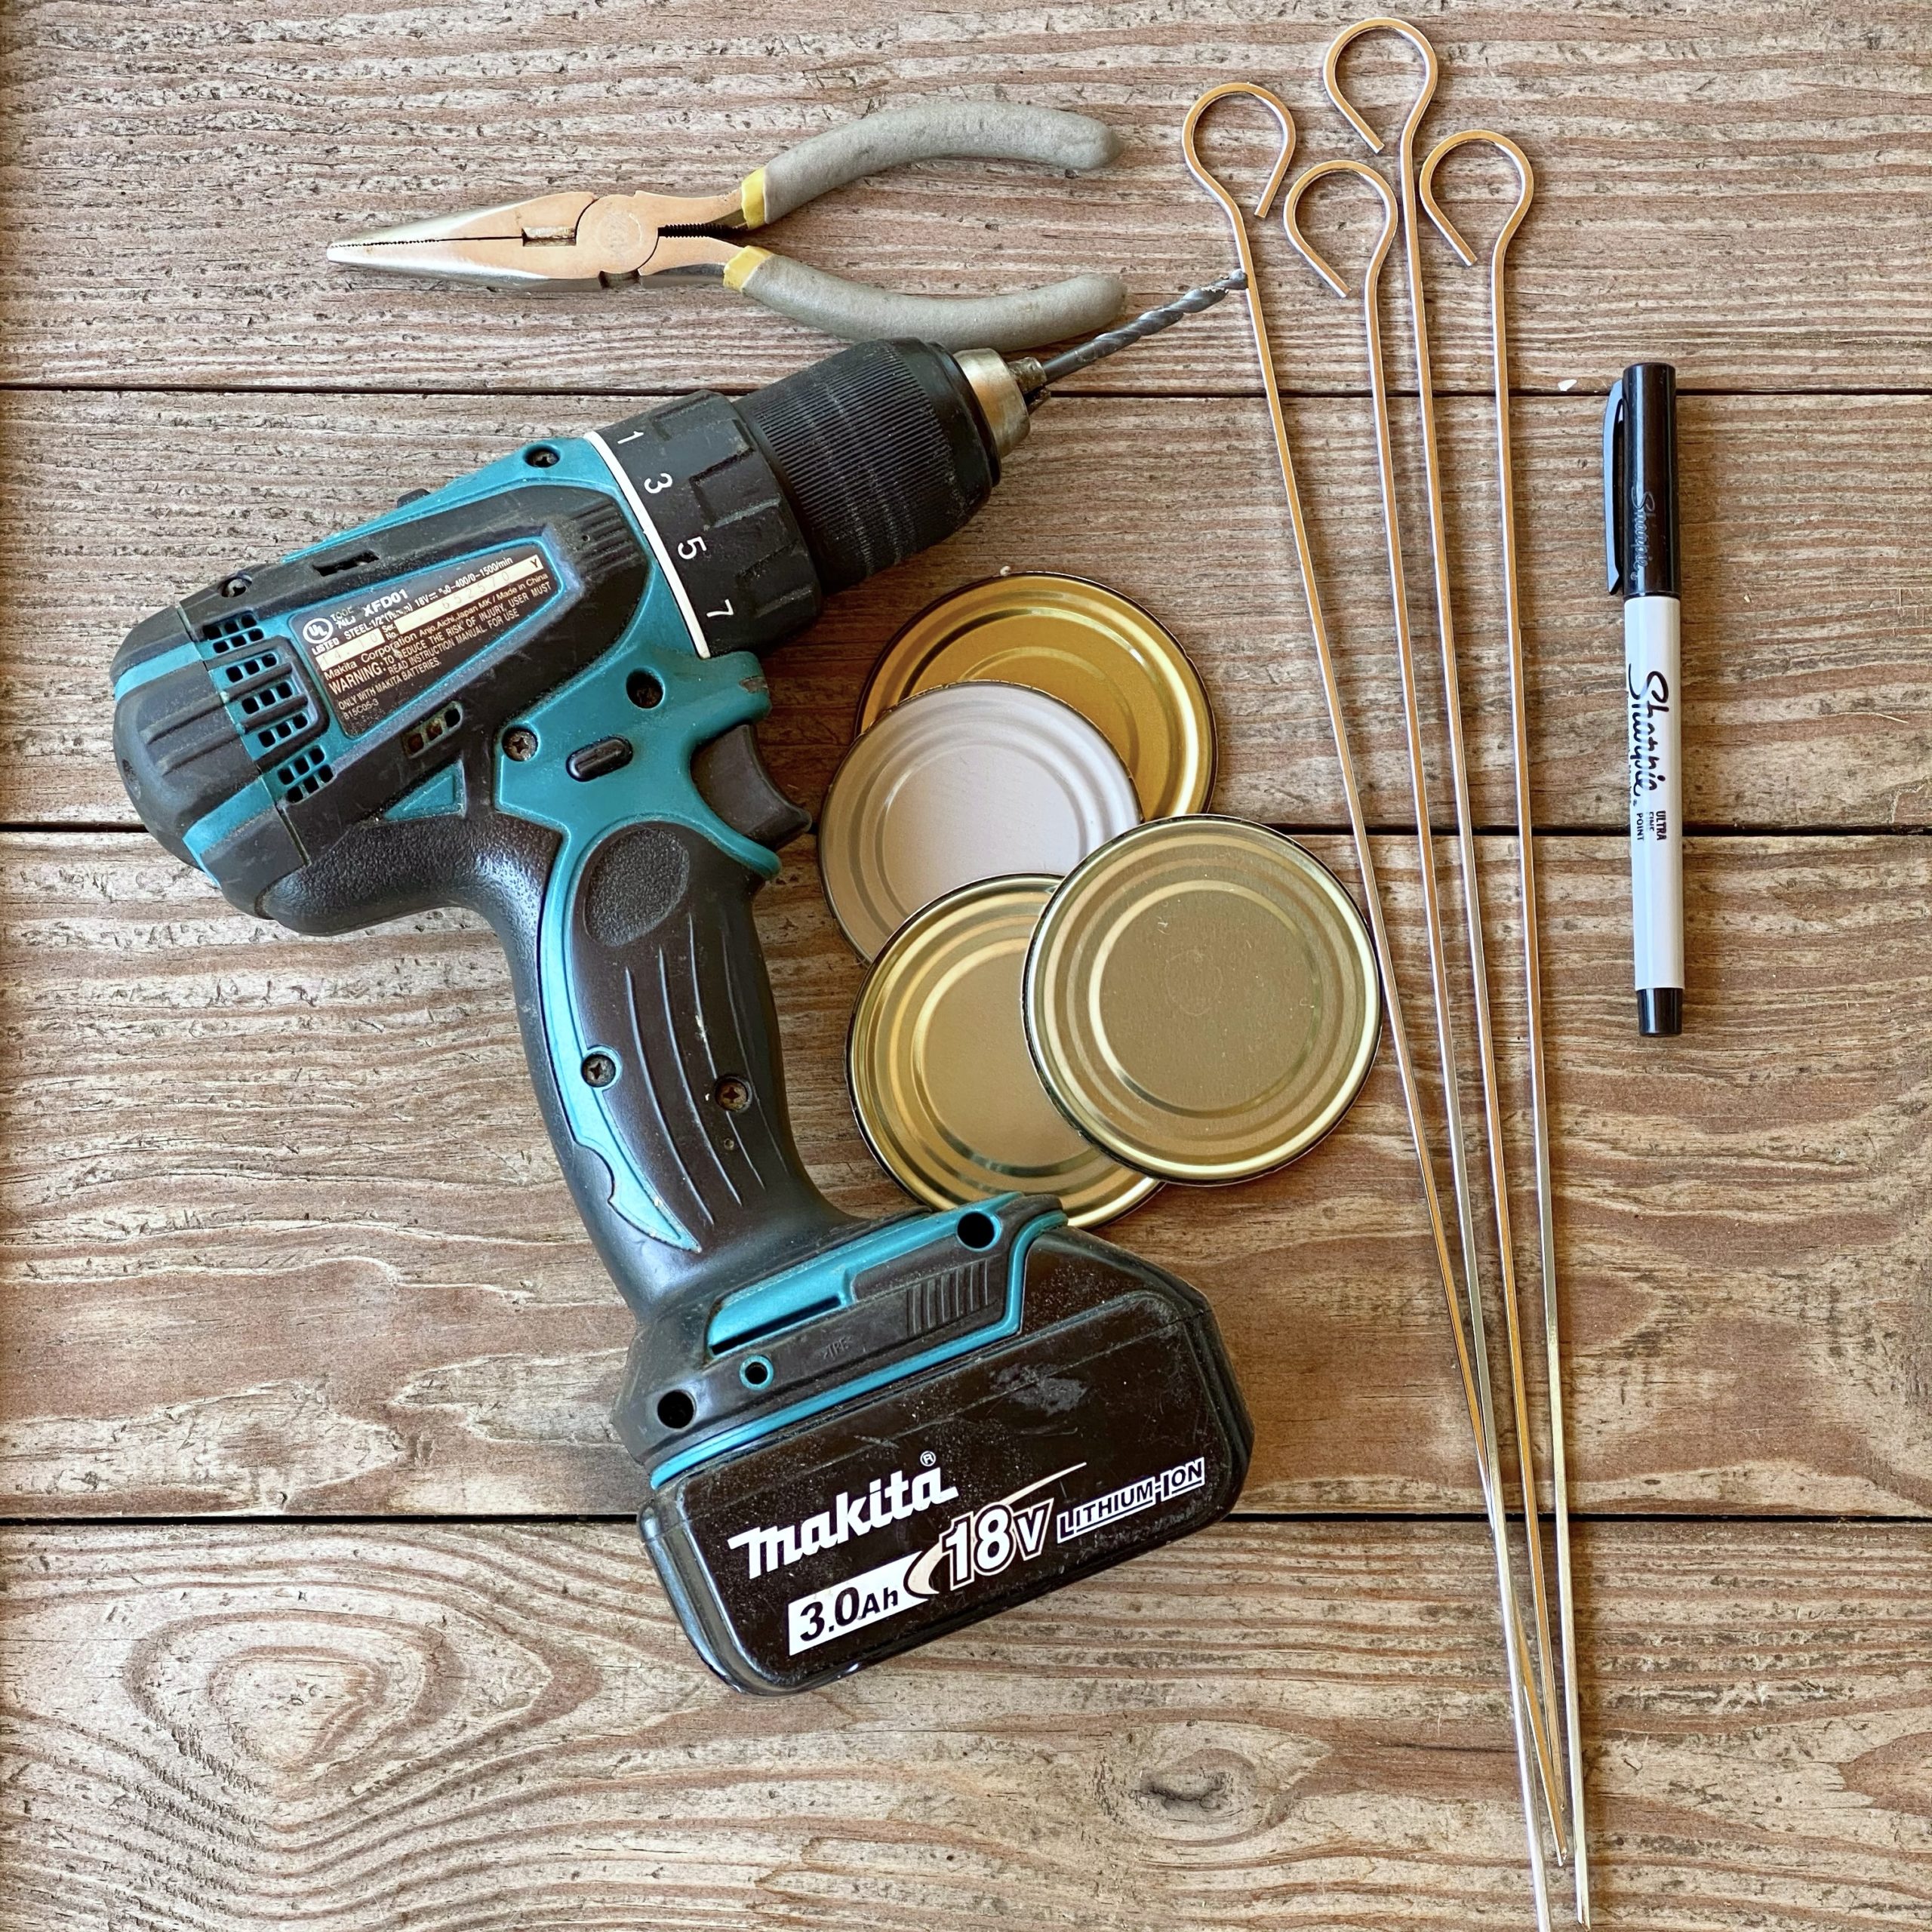 Supplies needed to make DIY garden markers: tin can tops, metal skewers, pliers, a drill, and a waterproof marker.